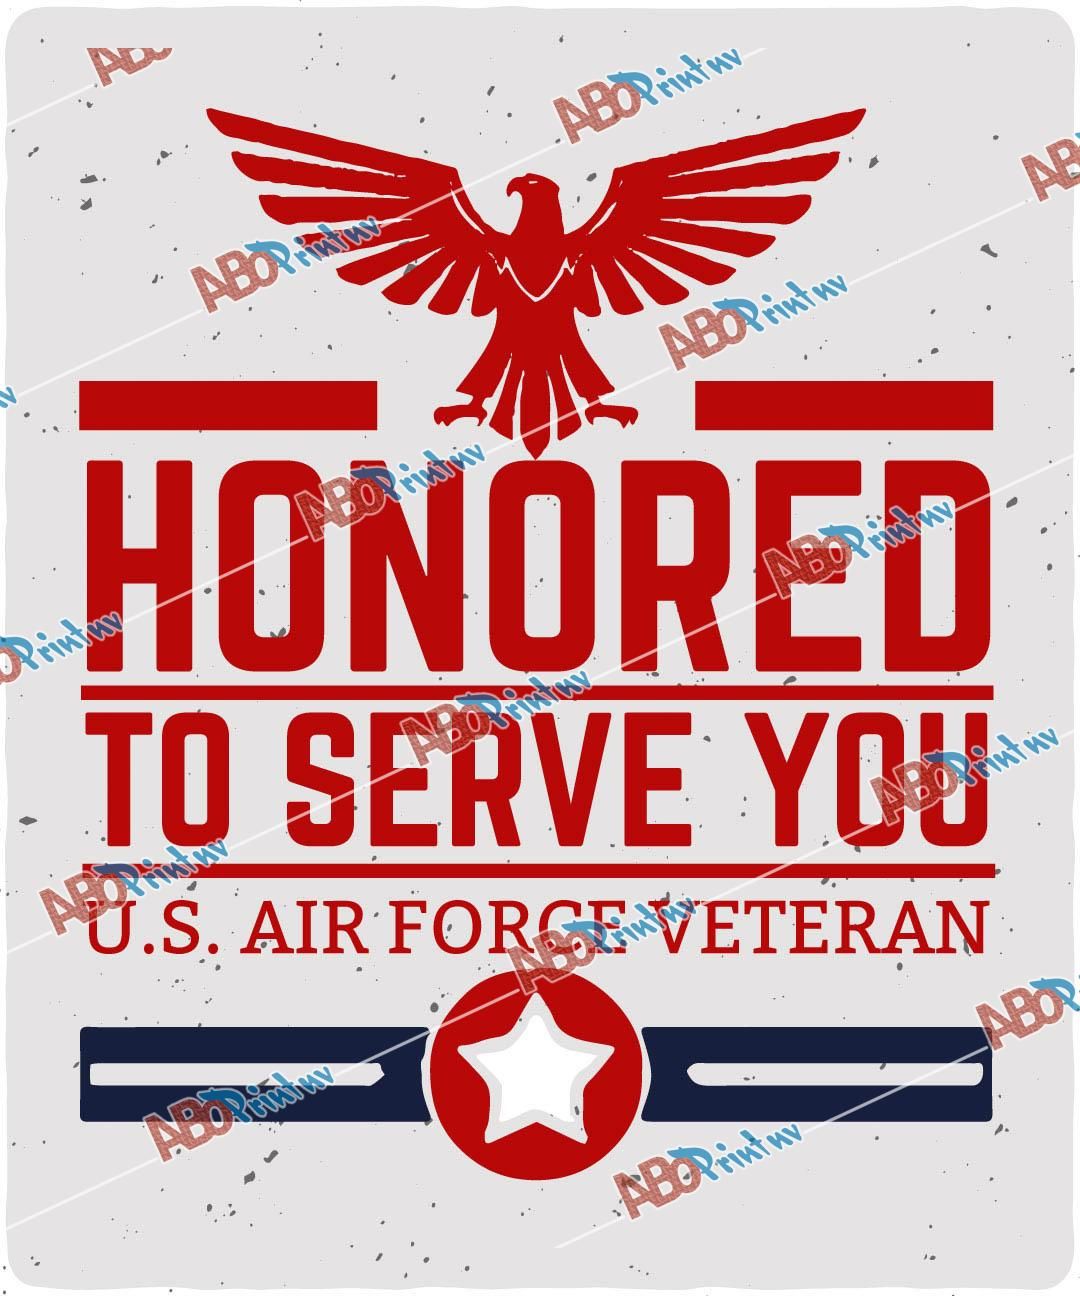 Honored to serve you.jpg